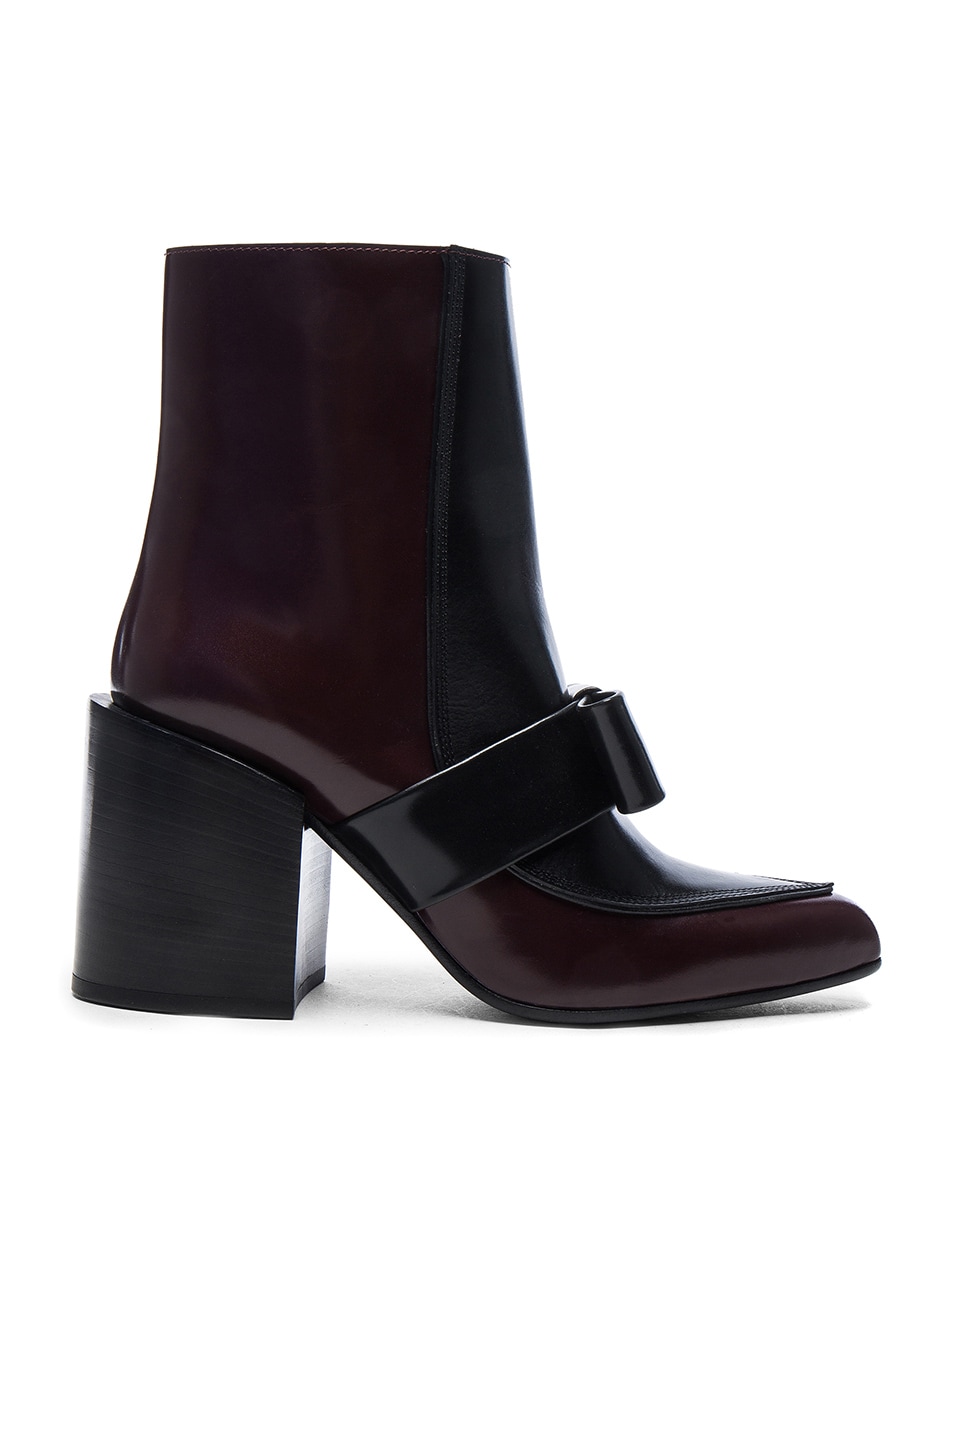 Image 1 of Marni Bow Leather Booties in Dark